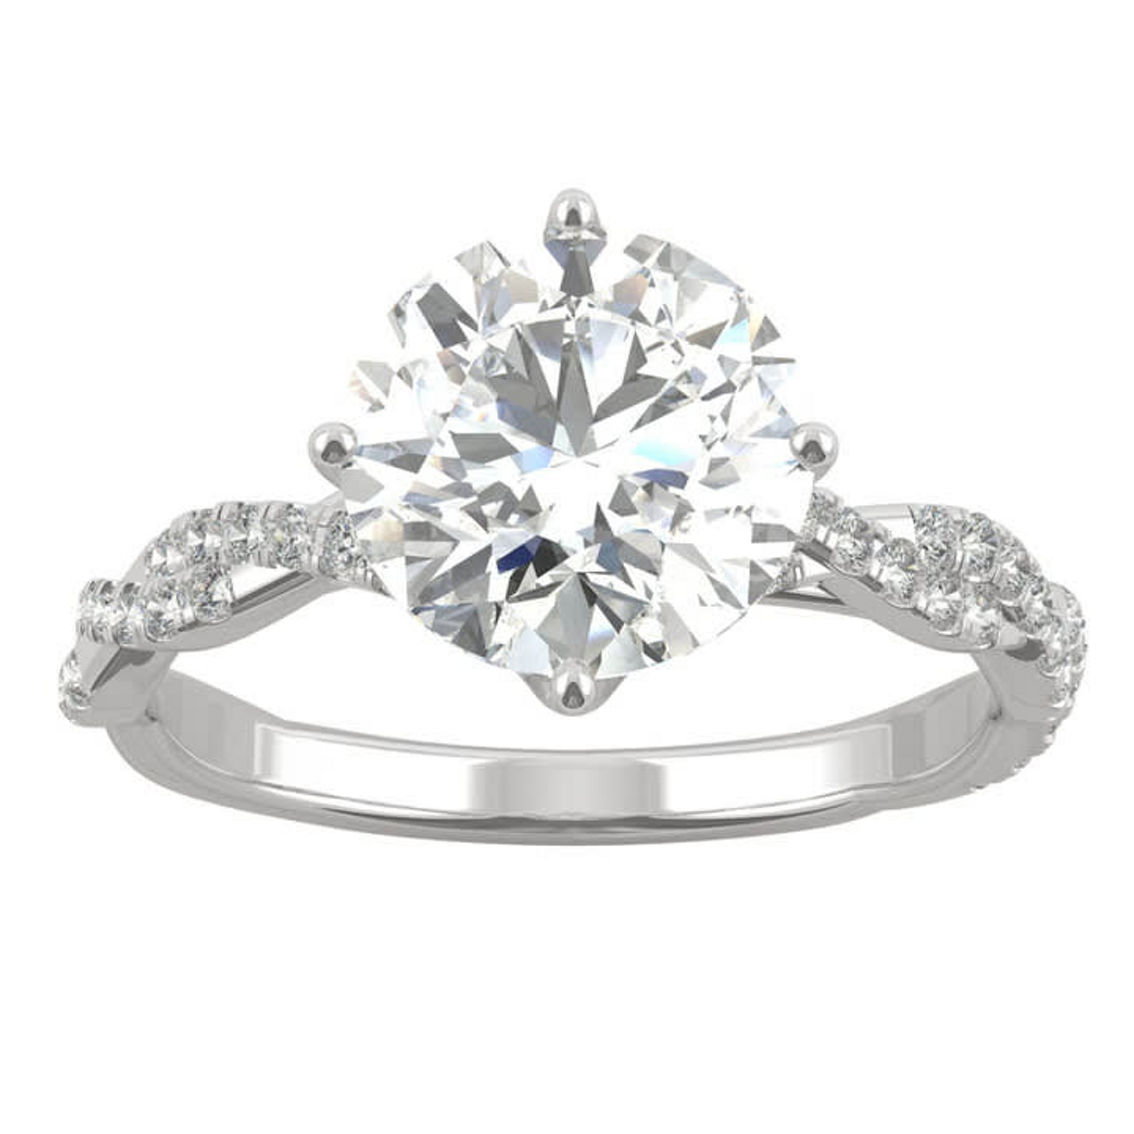 Charles & Colvard 2.30cttw Moissanite Twist Band Engagement Ring in 14k White Gold - Image 1 of 5